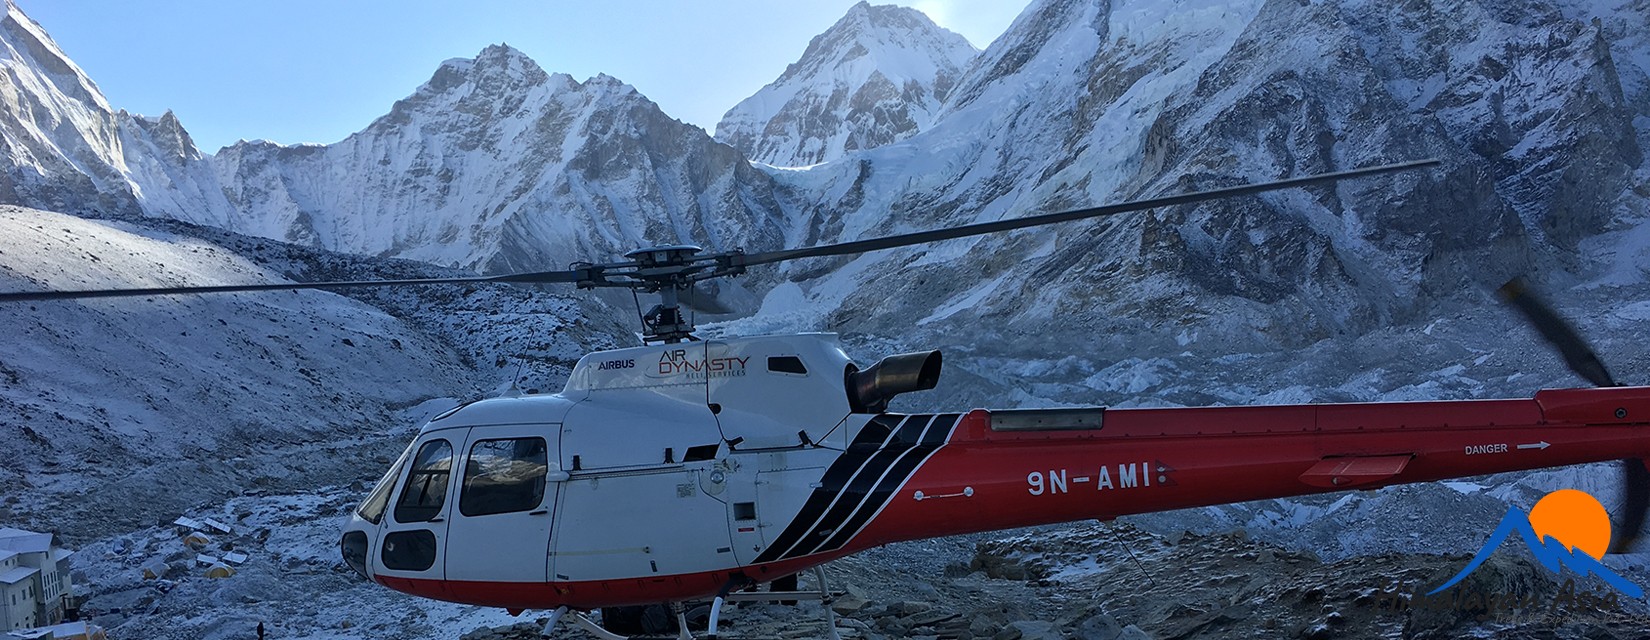 Helicopter-Everest